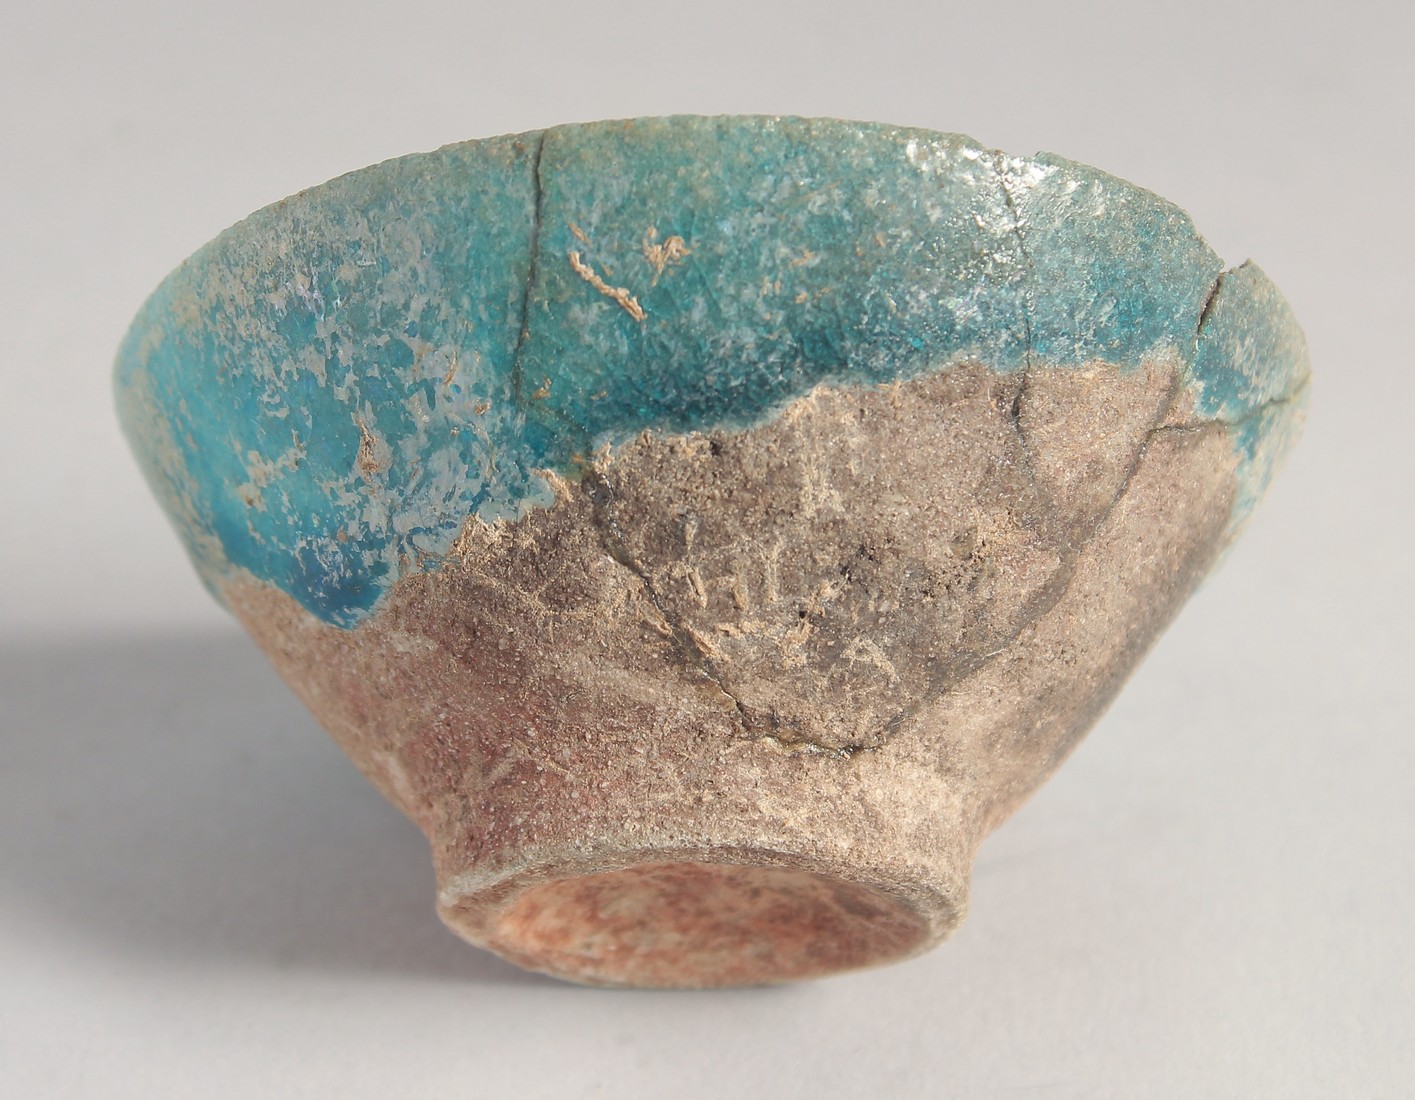 A PAIR OF TWELFTH CENTURY IRAN KASHAN GLAZED TURQUOISE POTTERY BOWLS. Both 8.5cm diameter - Image 3 of 5